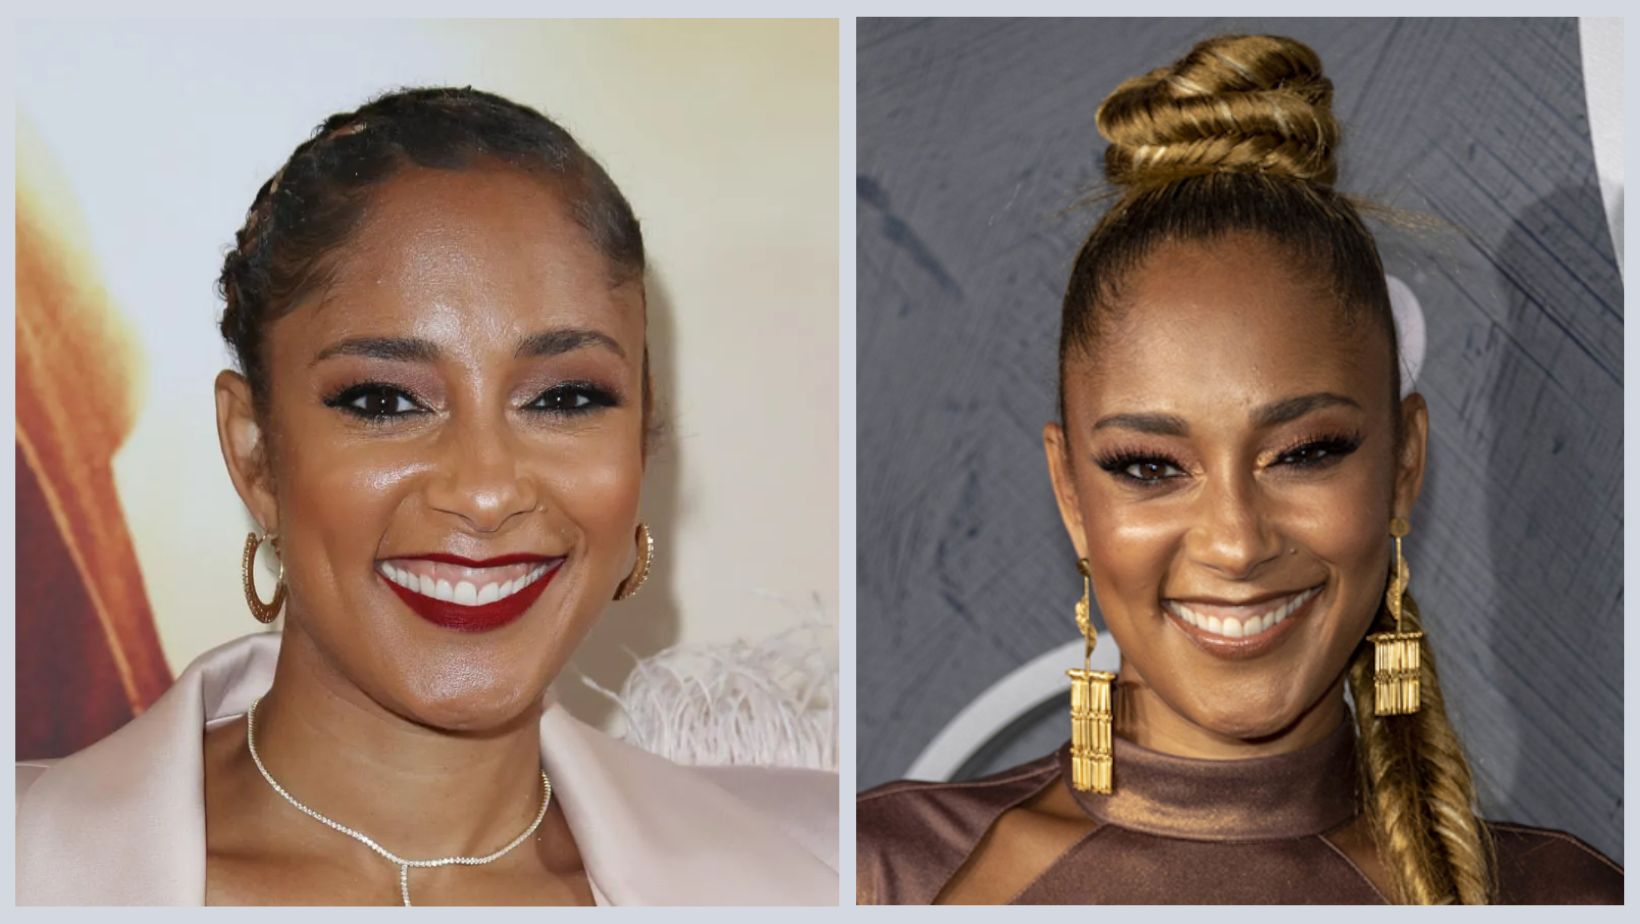 Amanda Seales Boyfriend: Is She Married To James Wright?